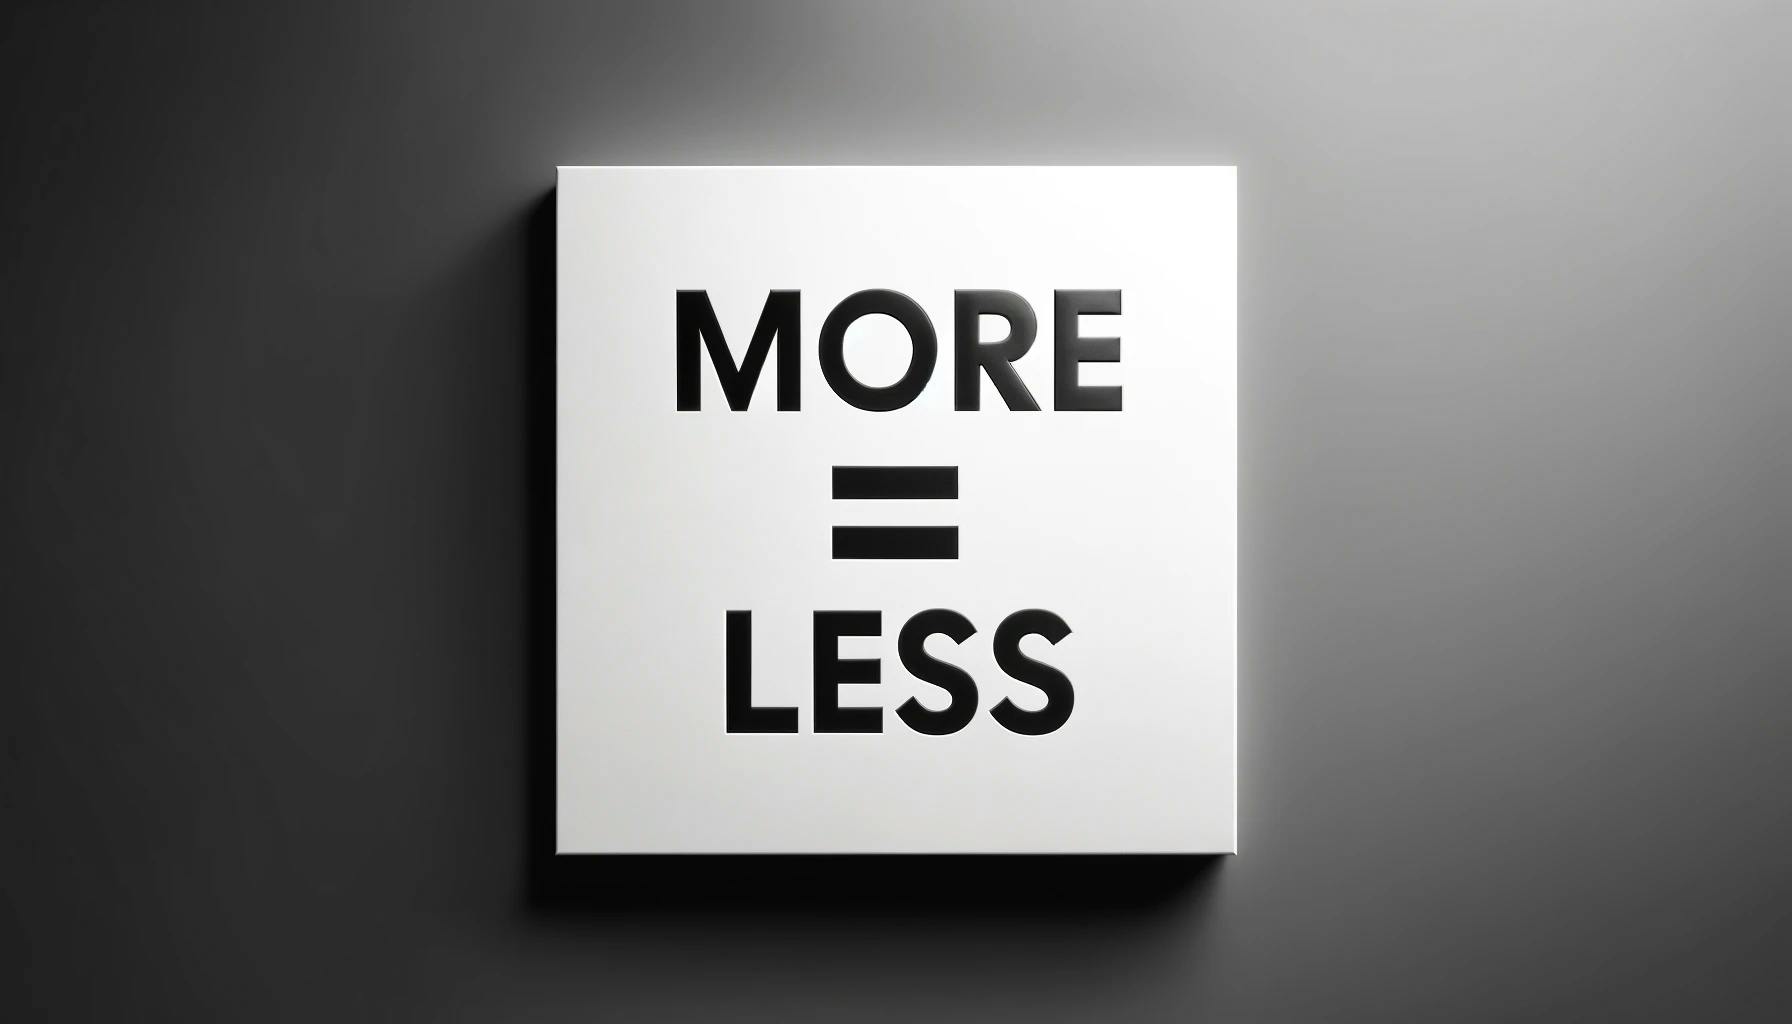 more = less